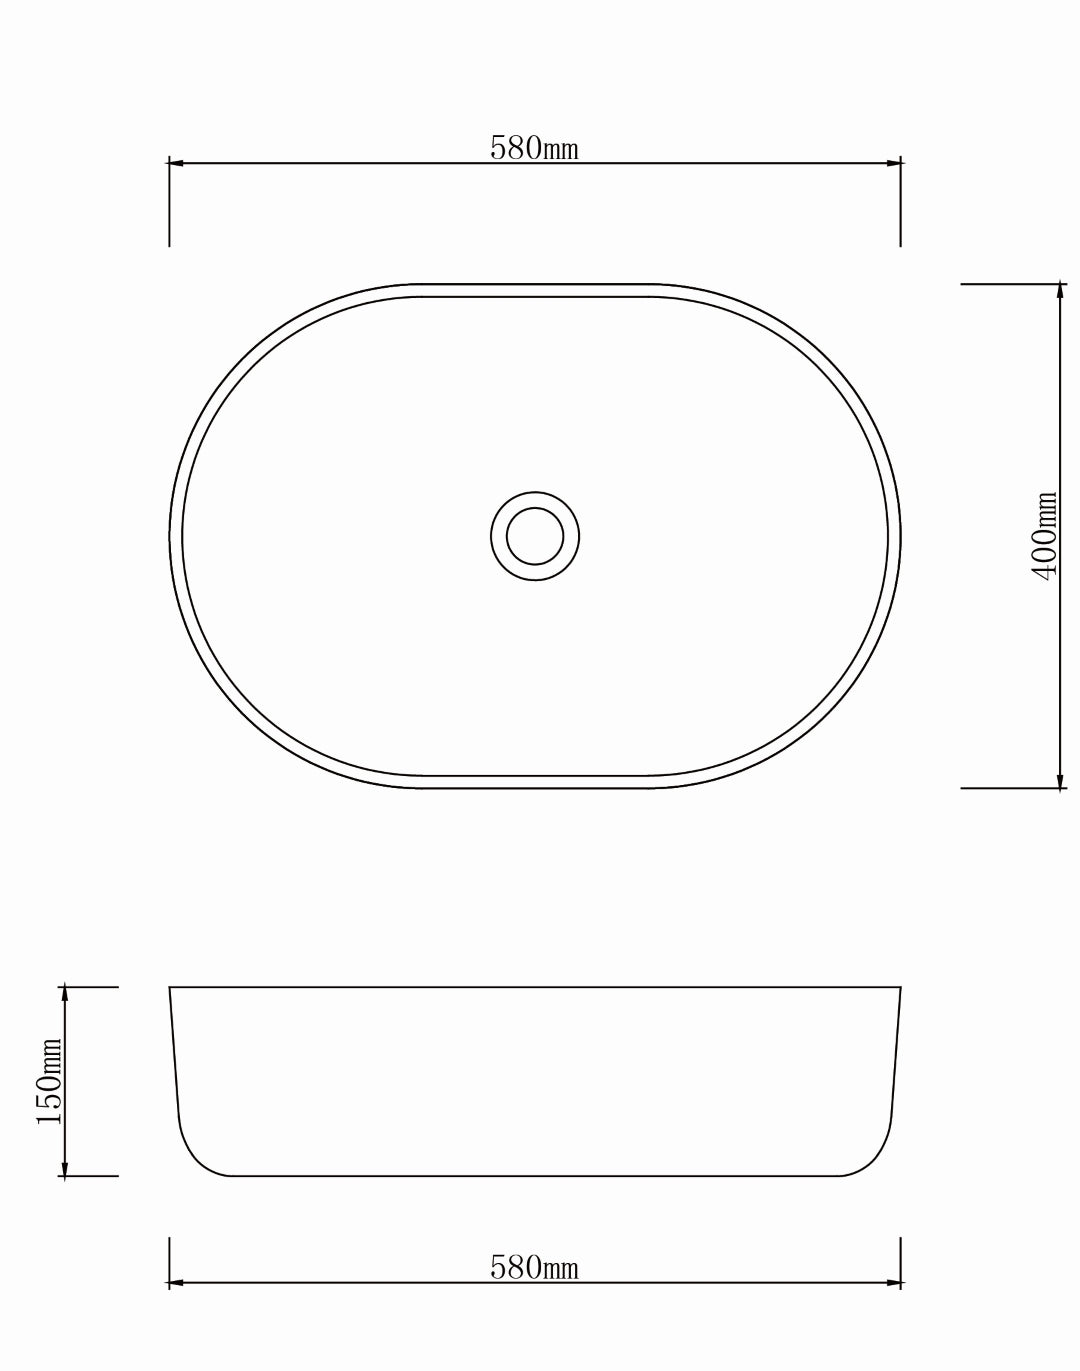 INFINITY ABOVE COUNTER BASIN OVAL PORCELAIN 580MM